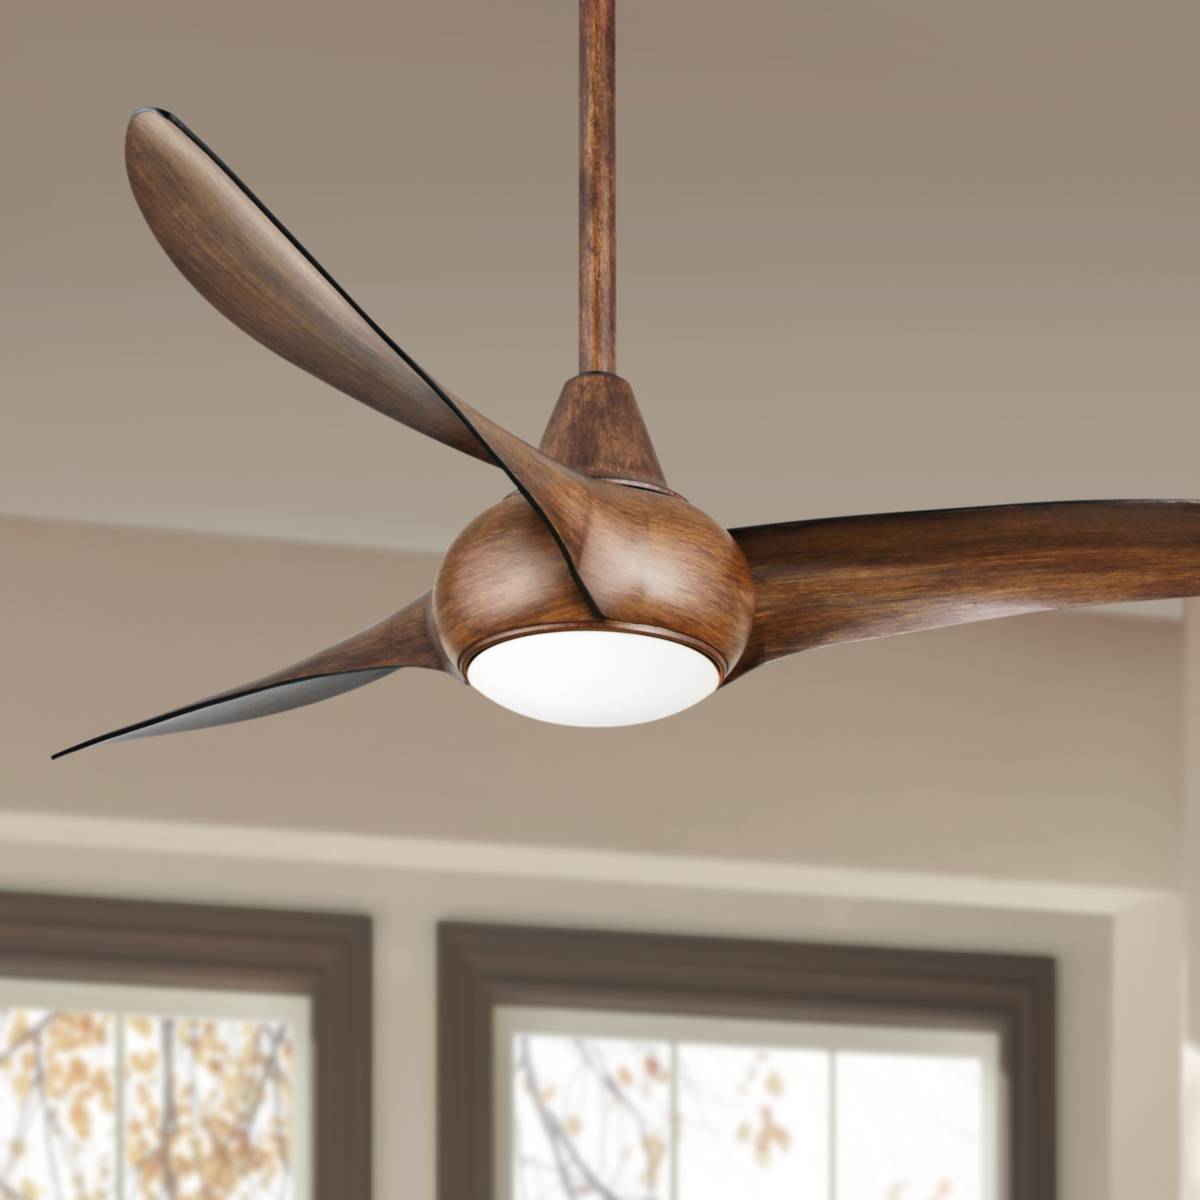 Ceiling Fans With Lights Outdoor Hugger Fans More Lamps Plus,How To Make The Most Out Of A Small Bedroom